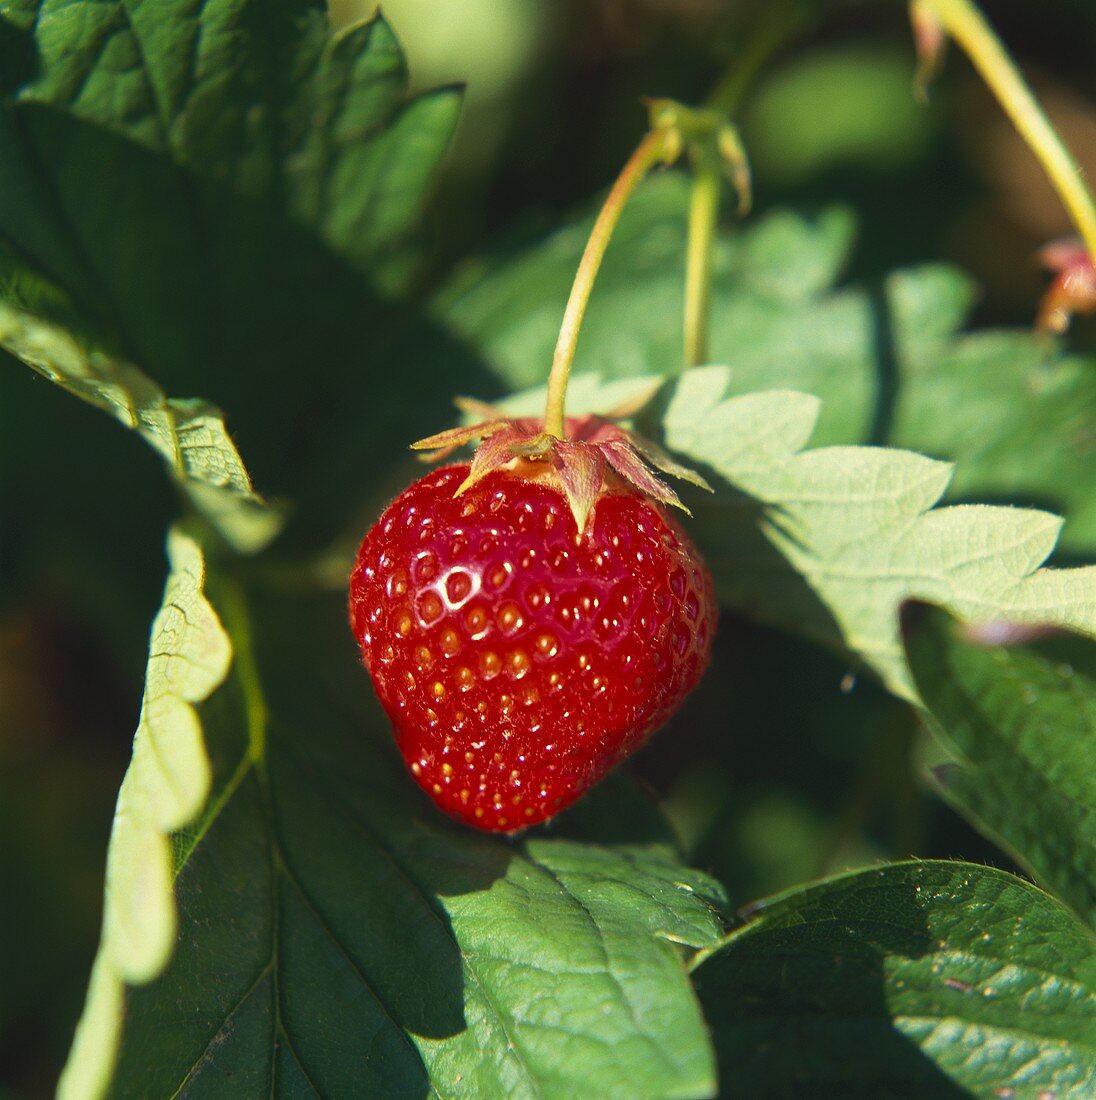 A strawberry on the plant in the sun